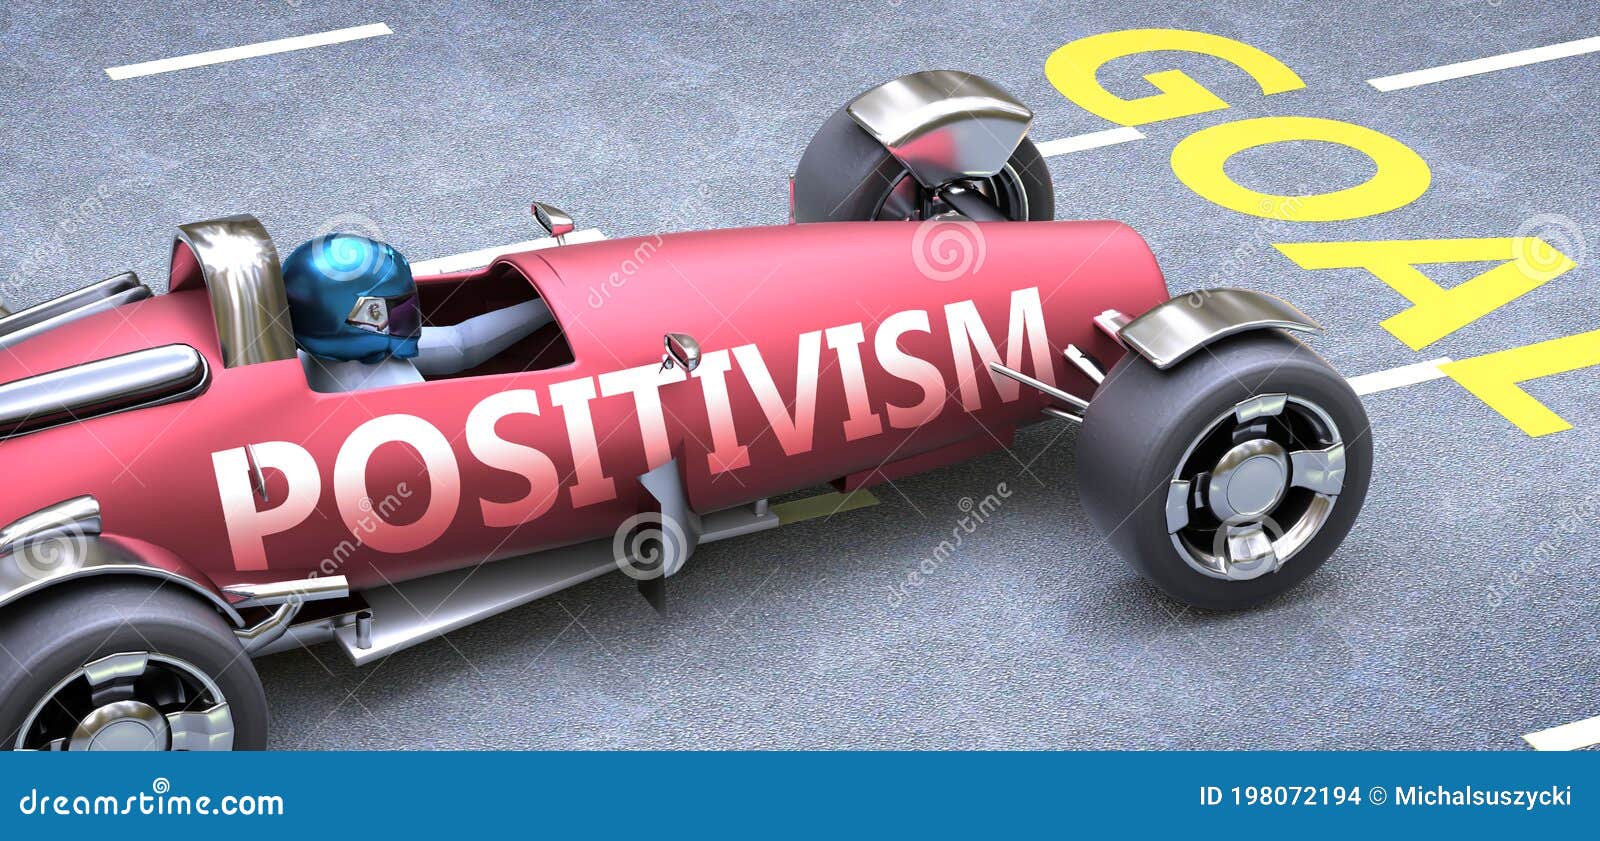 positivism helps reaching goals, pictured as a race car with a phrase positivism on a track as a metaphor of positivism playing